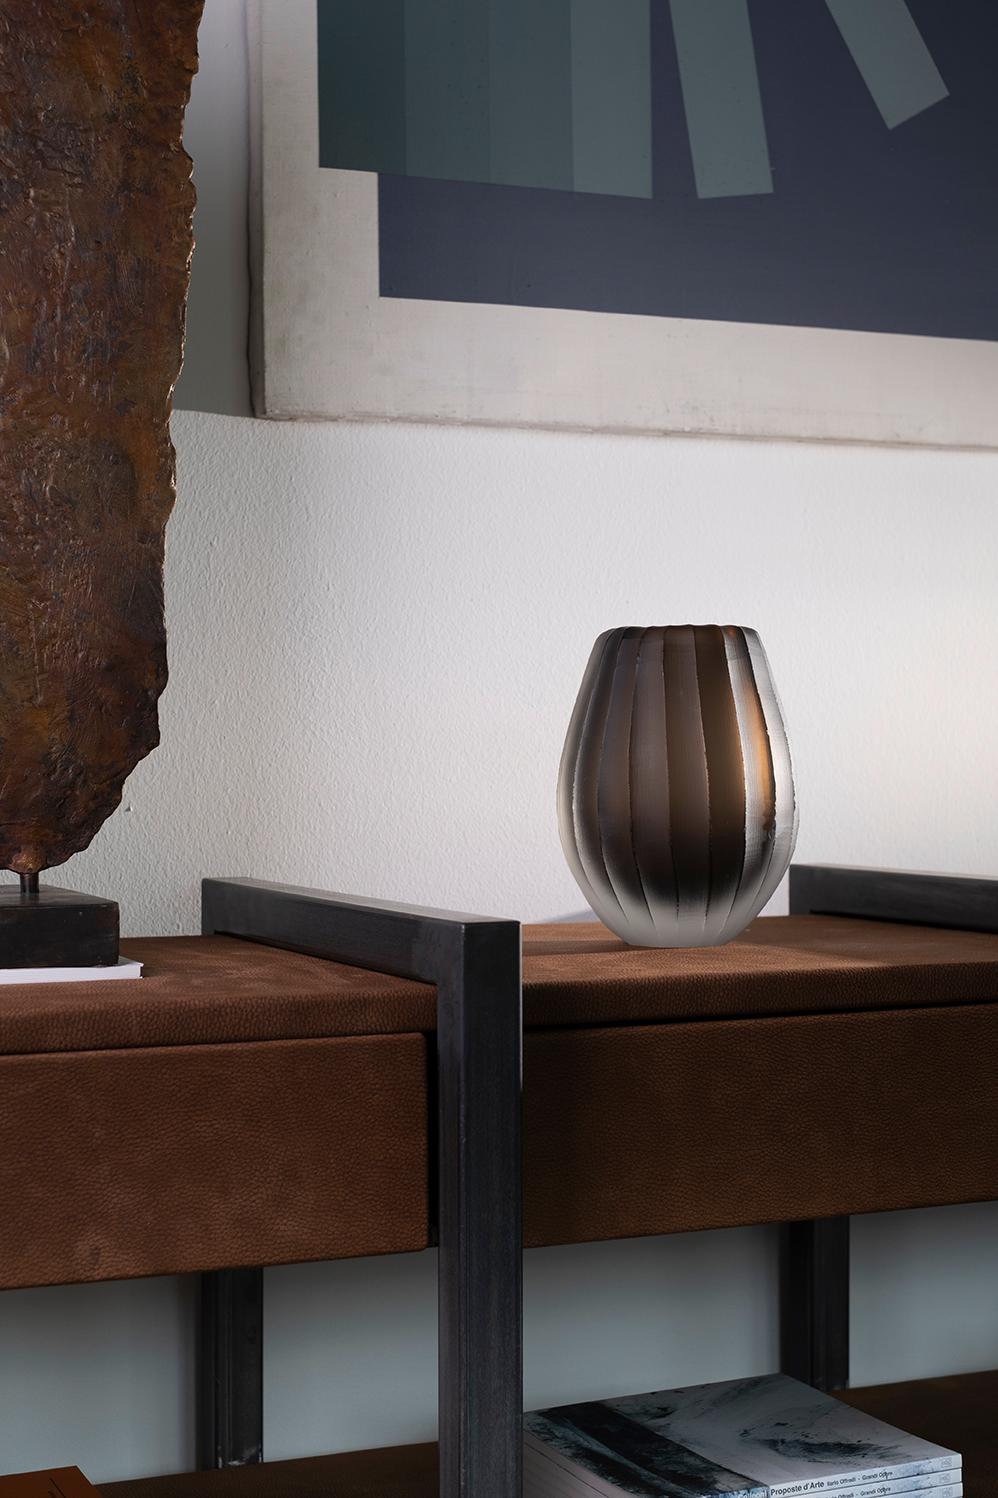 Linae Mini vase, Murano glass, designed by Federico Peri, 21st century. 
Linae Mini is a small-sized vase designed by Federico Peri to complete 
the Incisioni collection, which consists of table lights and vases of 
various sizes, the main feature